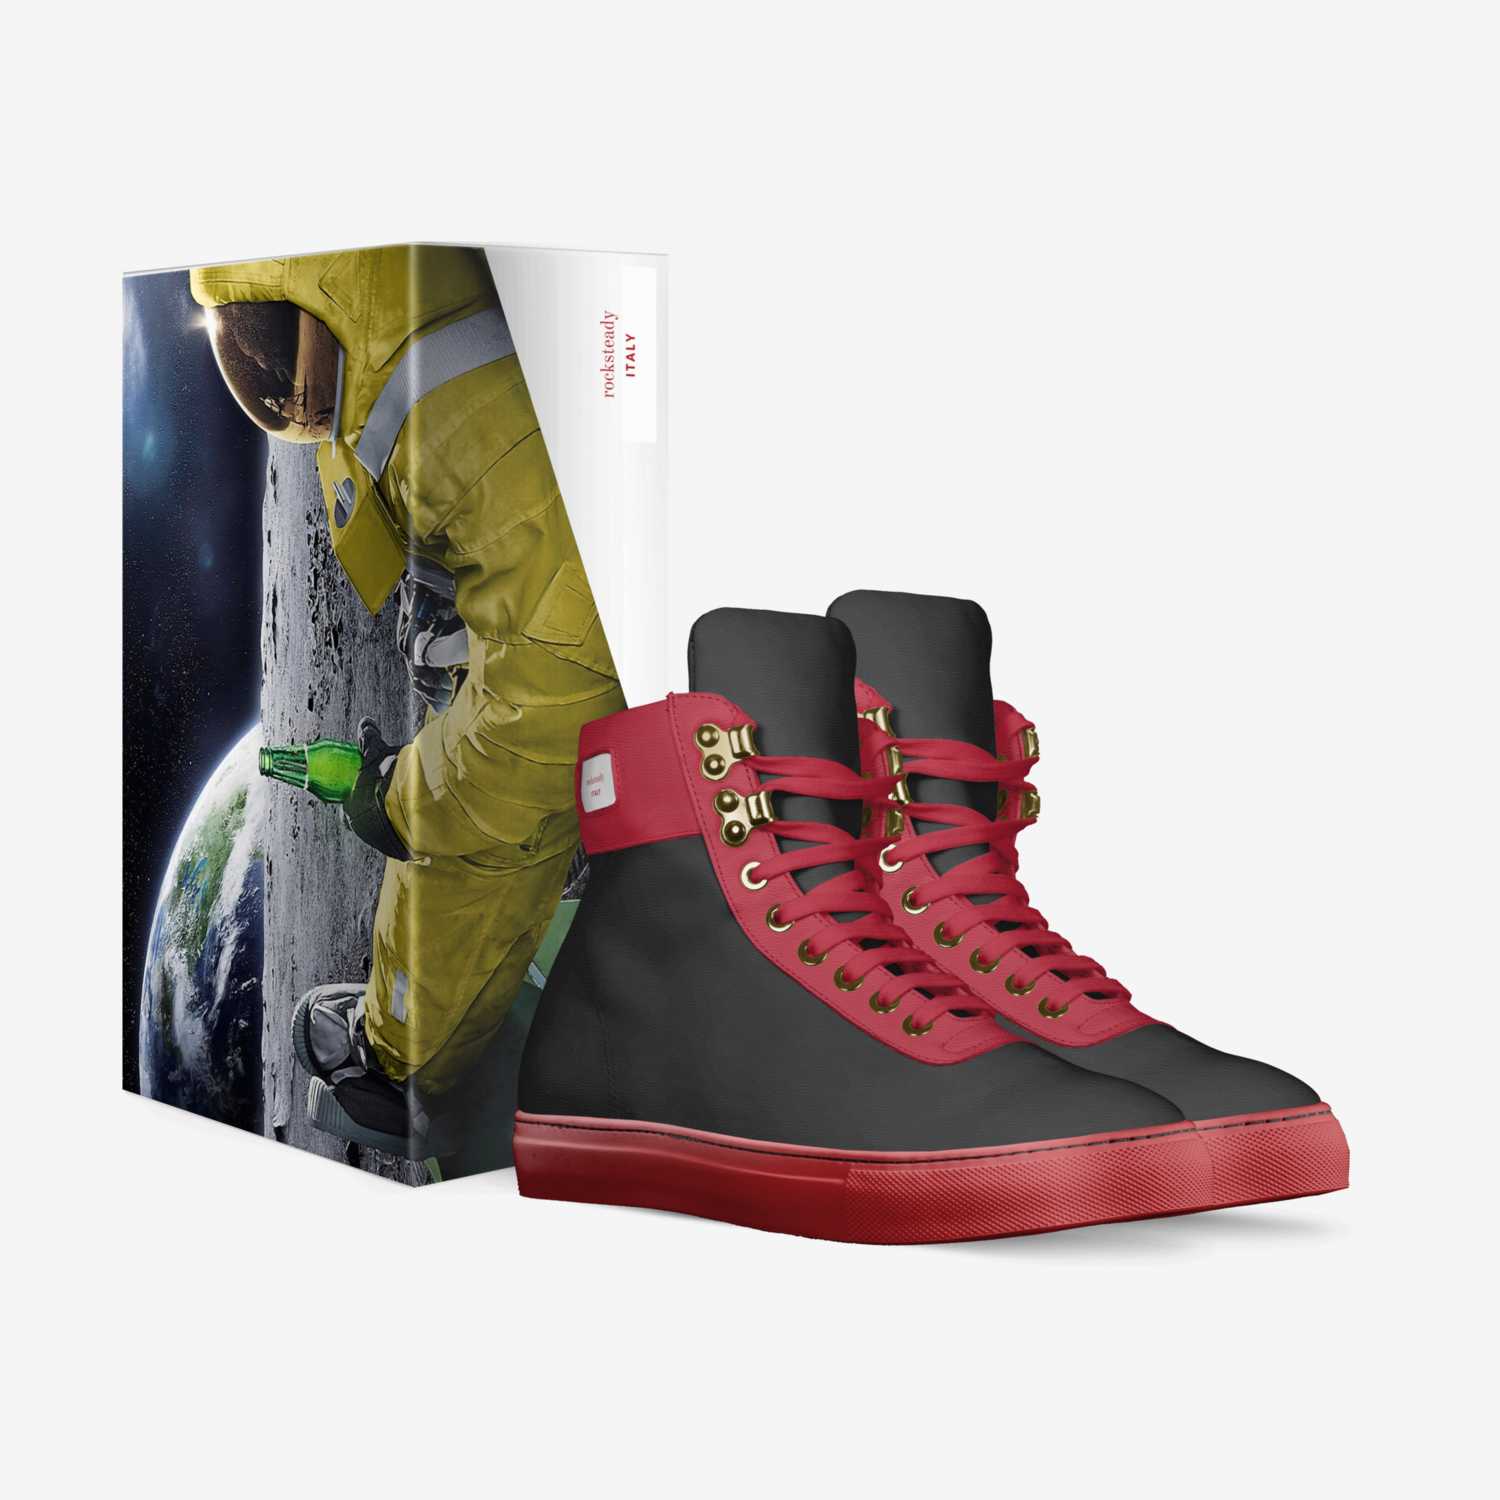 rocksteady custom made in Italy shoes by Rory Gray | Box view